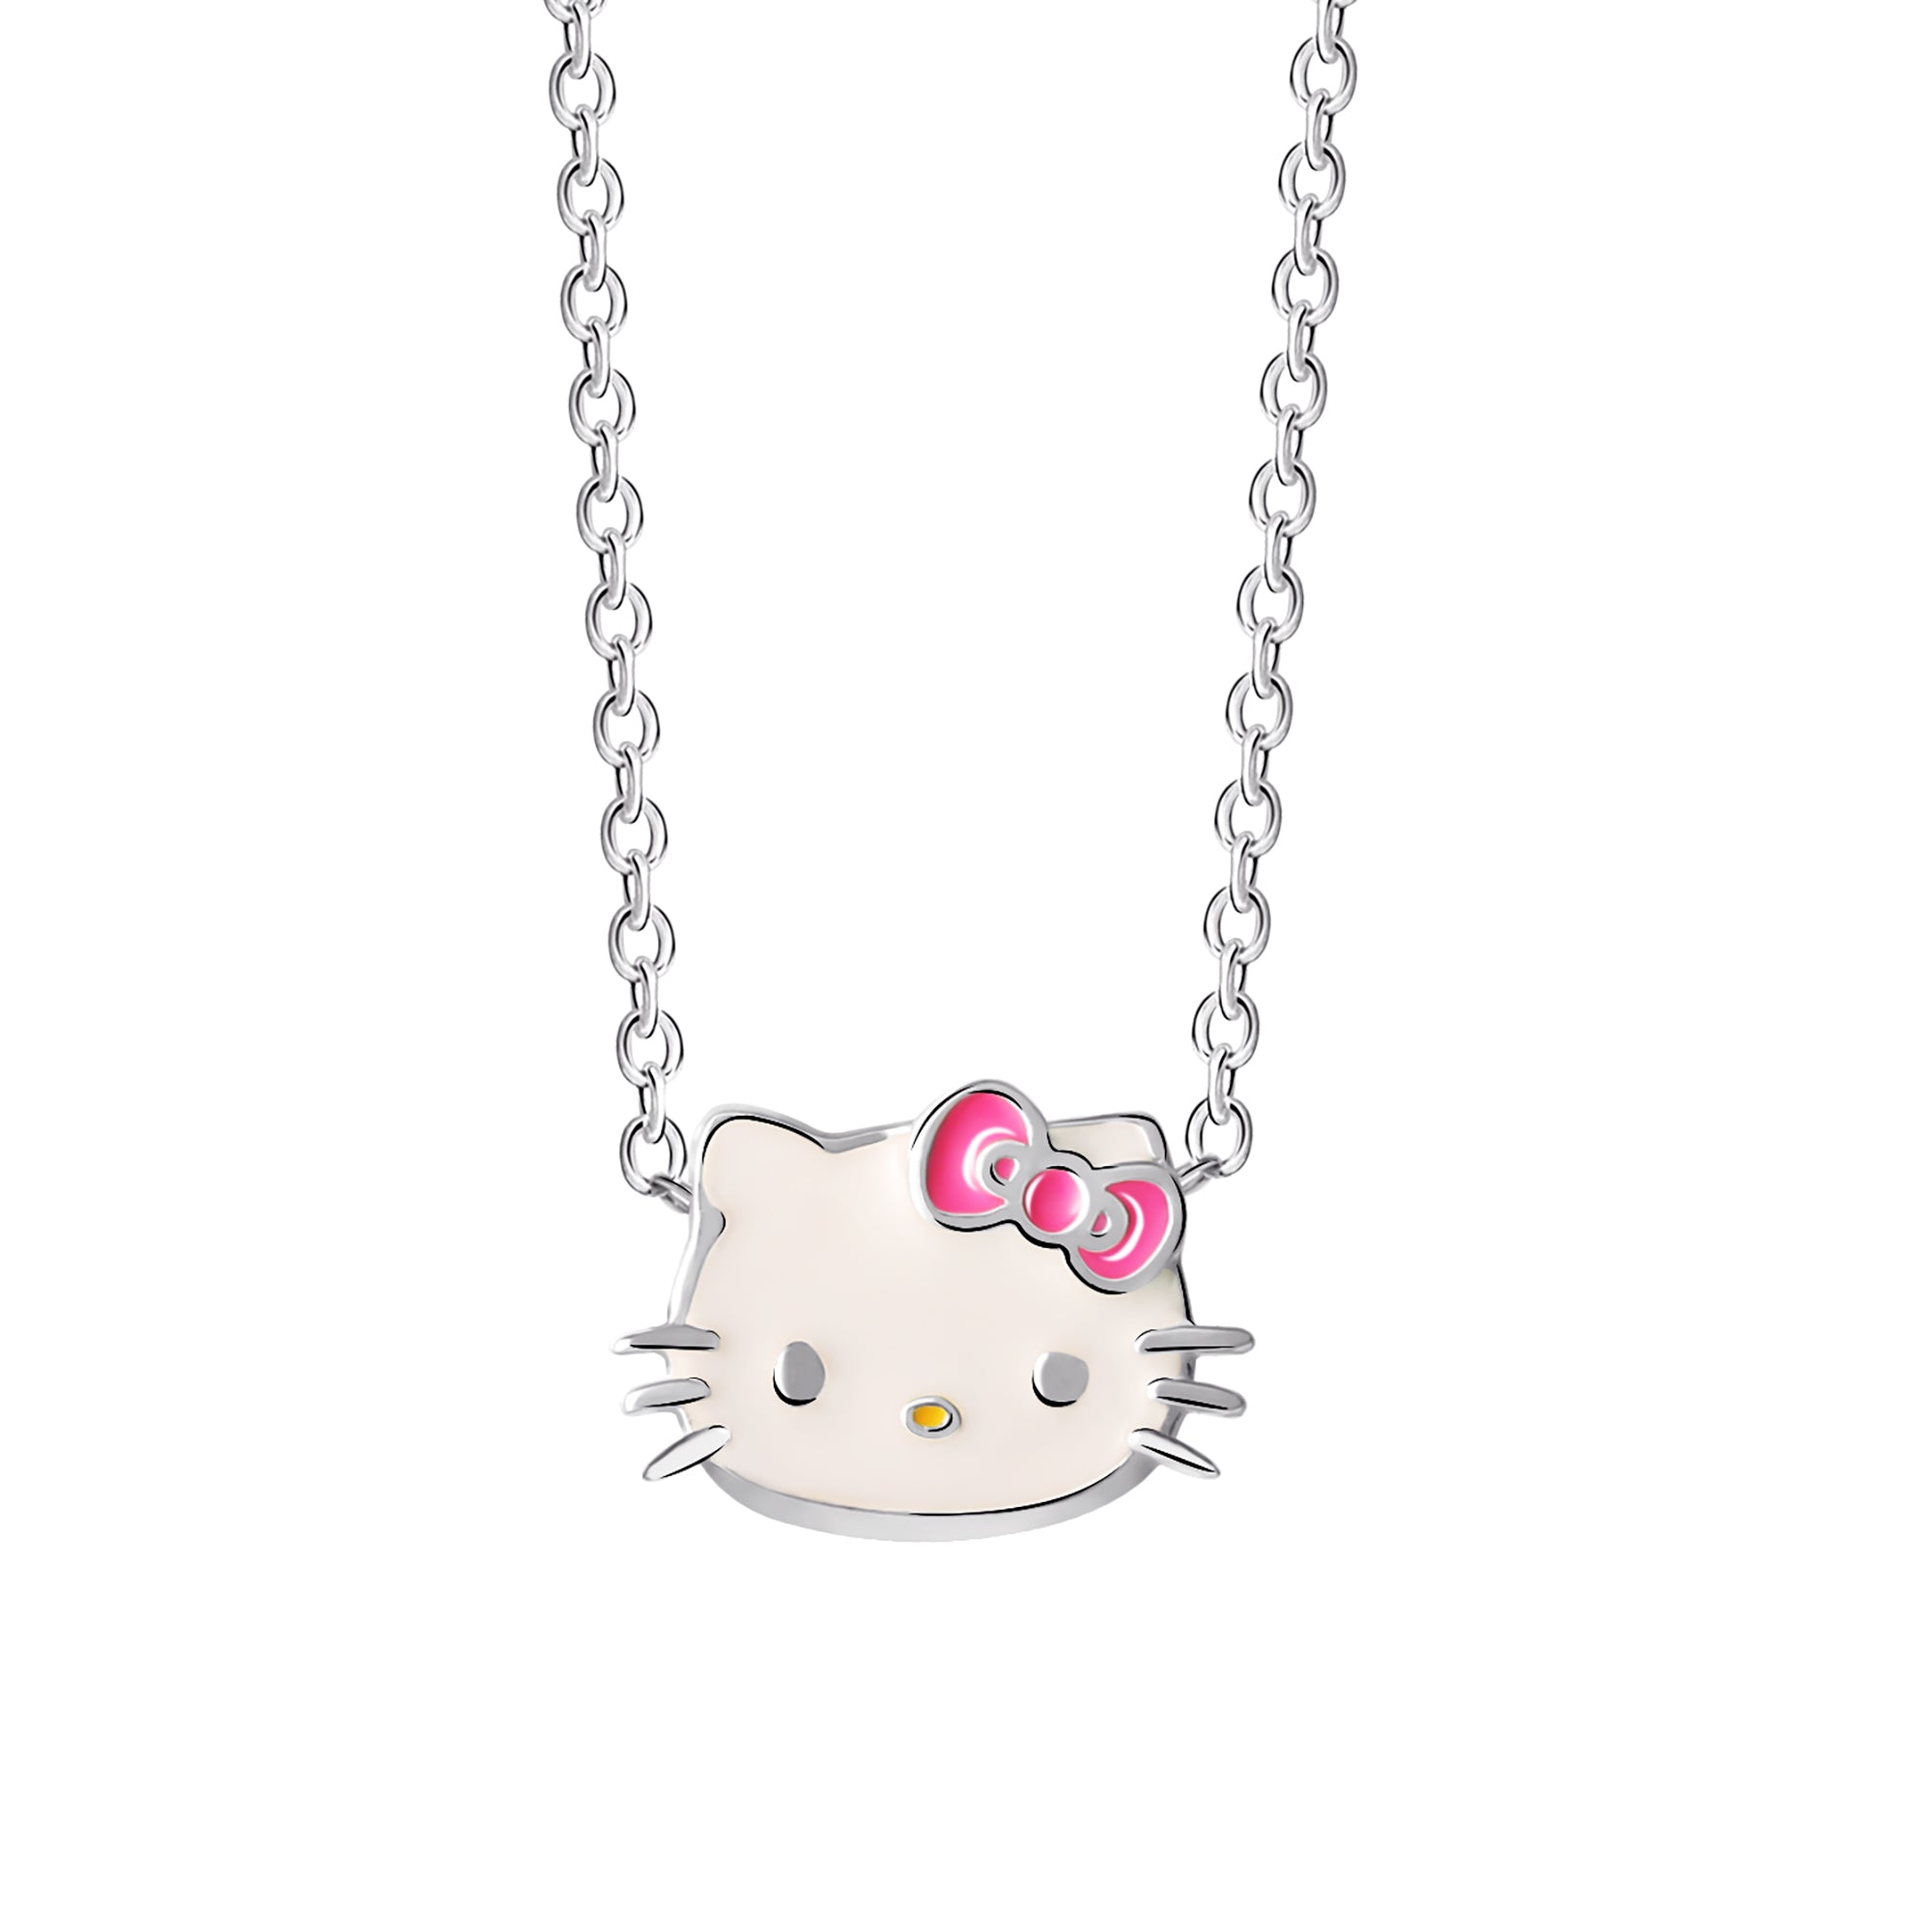 Sanrio Charmmykitty Hello Kitty x Story Charm Necklace S925 Silver Plating